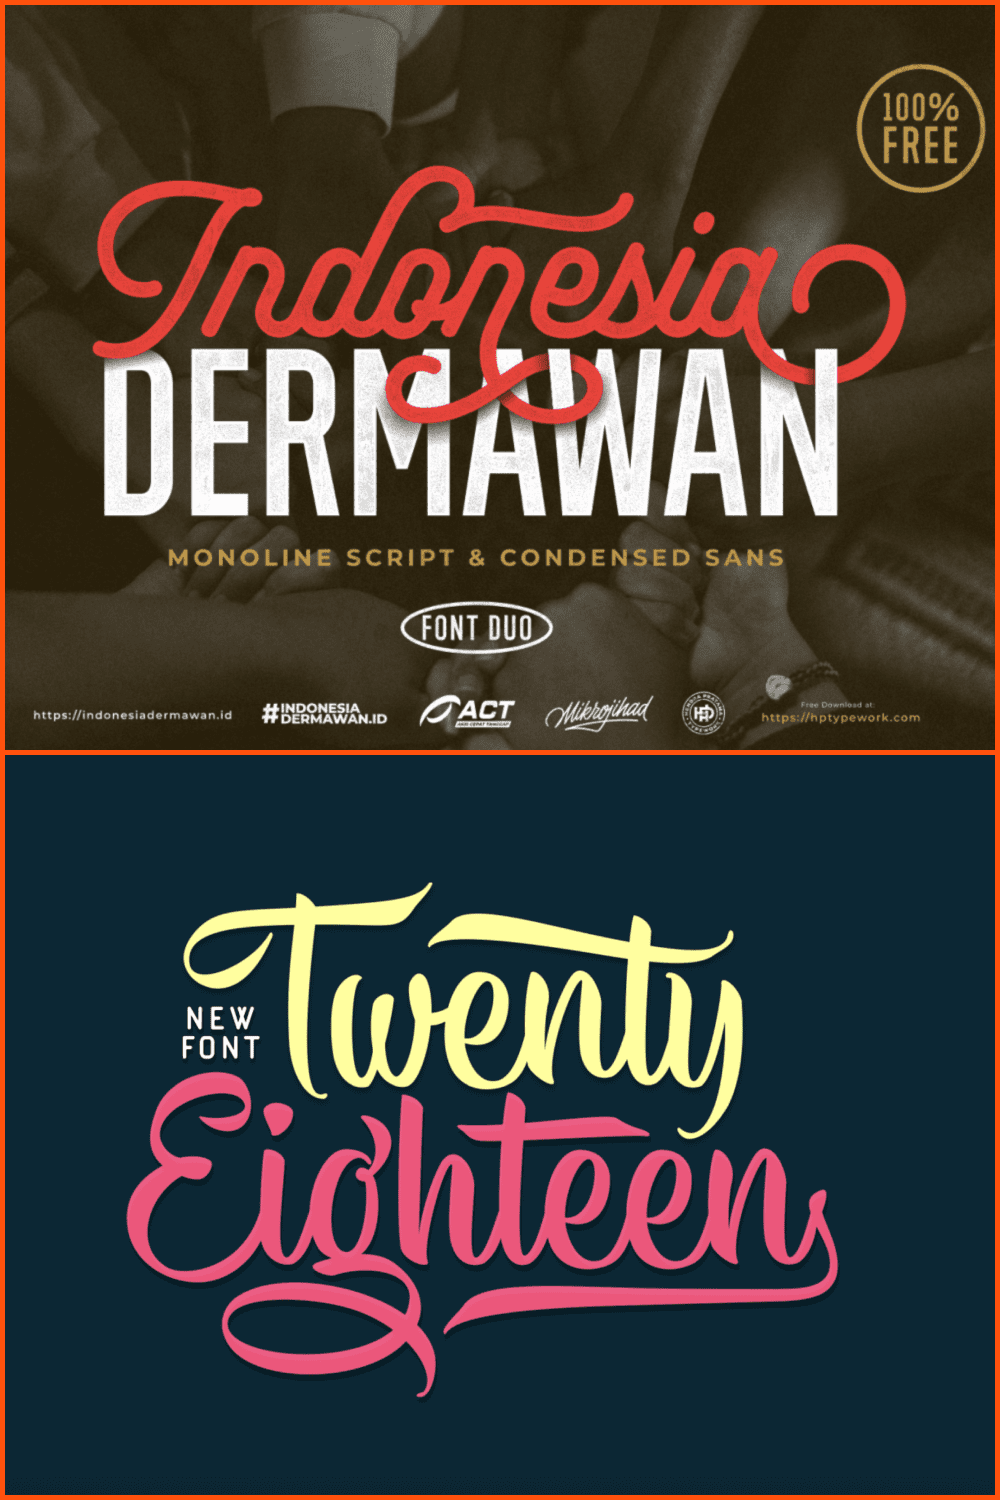 Collage with fonts made by Hendra Pratama.